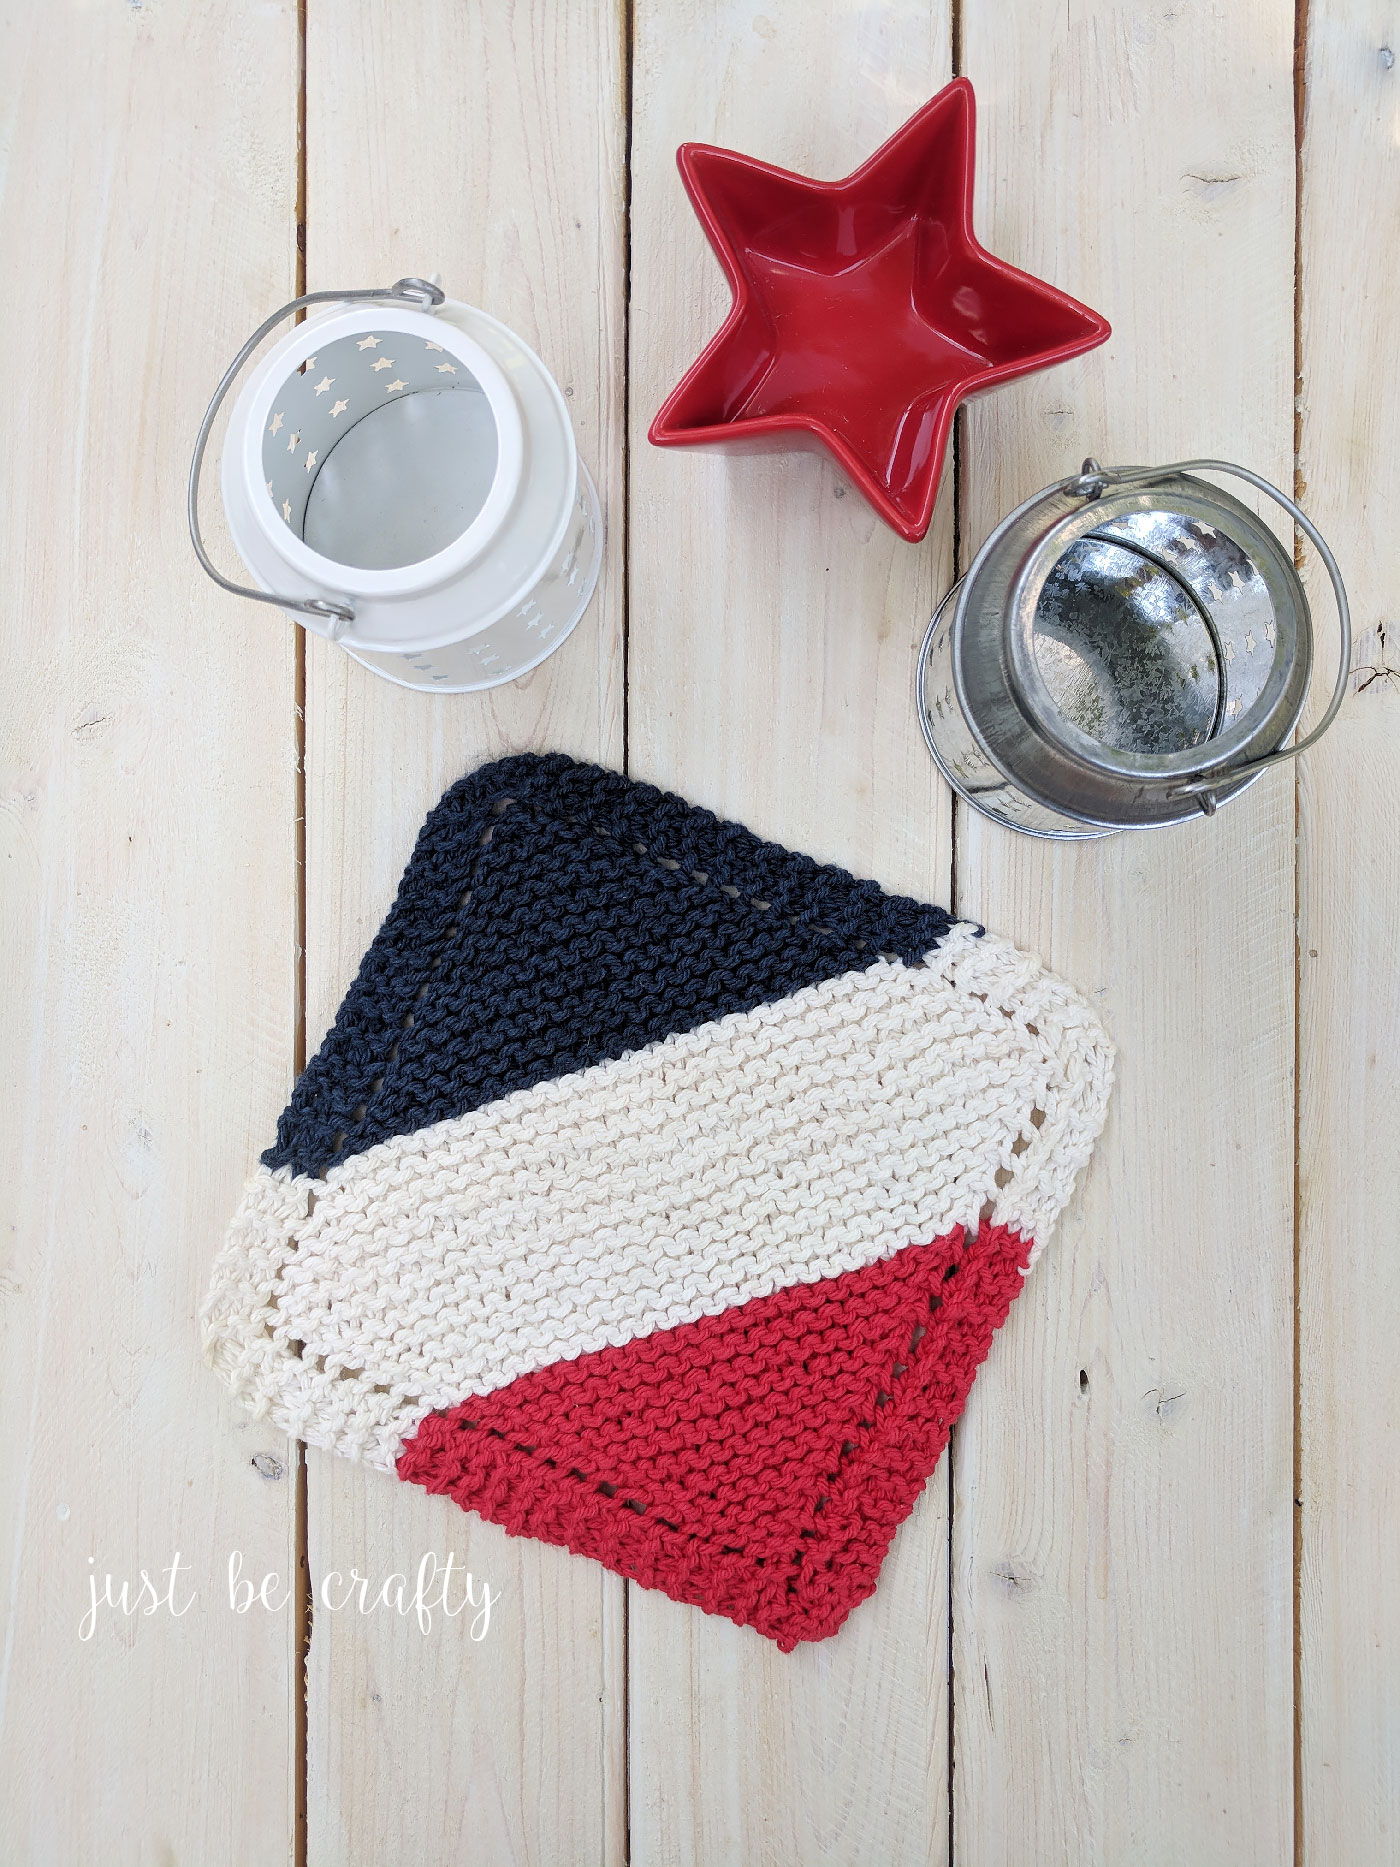 Classic Knitted Dishcloth Pattern